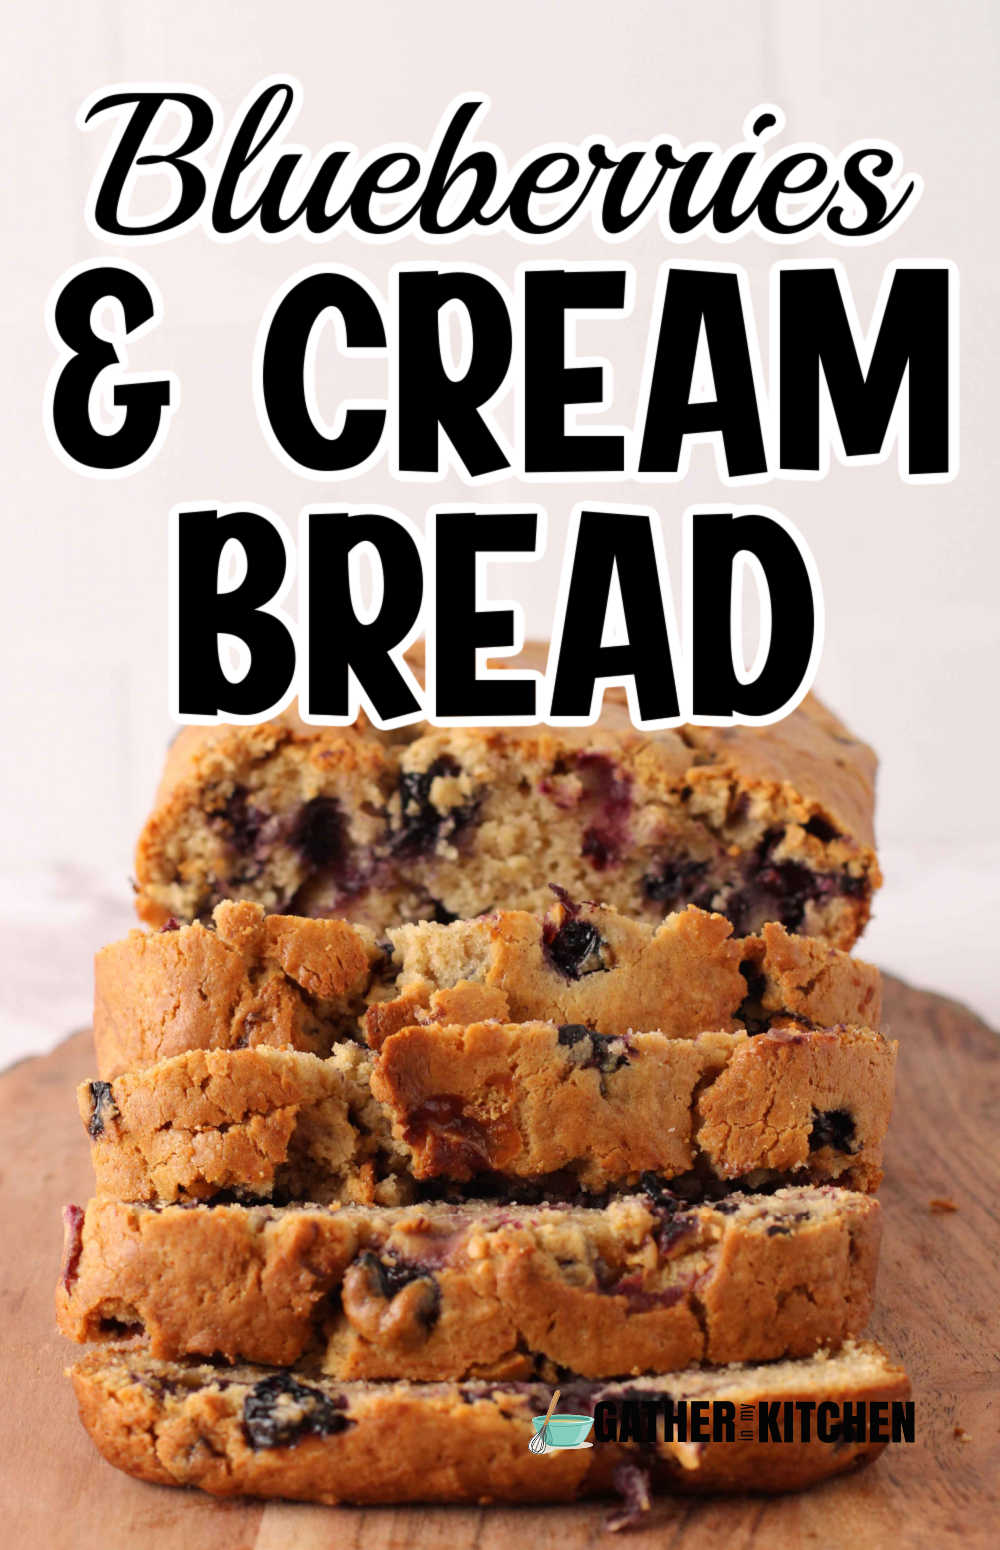 Pin image: top says "blueberries & cream bread" and pic of cut up bread on cutting board.